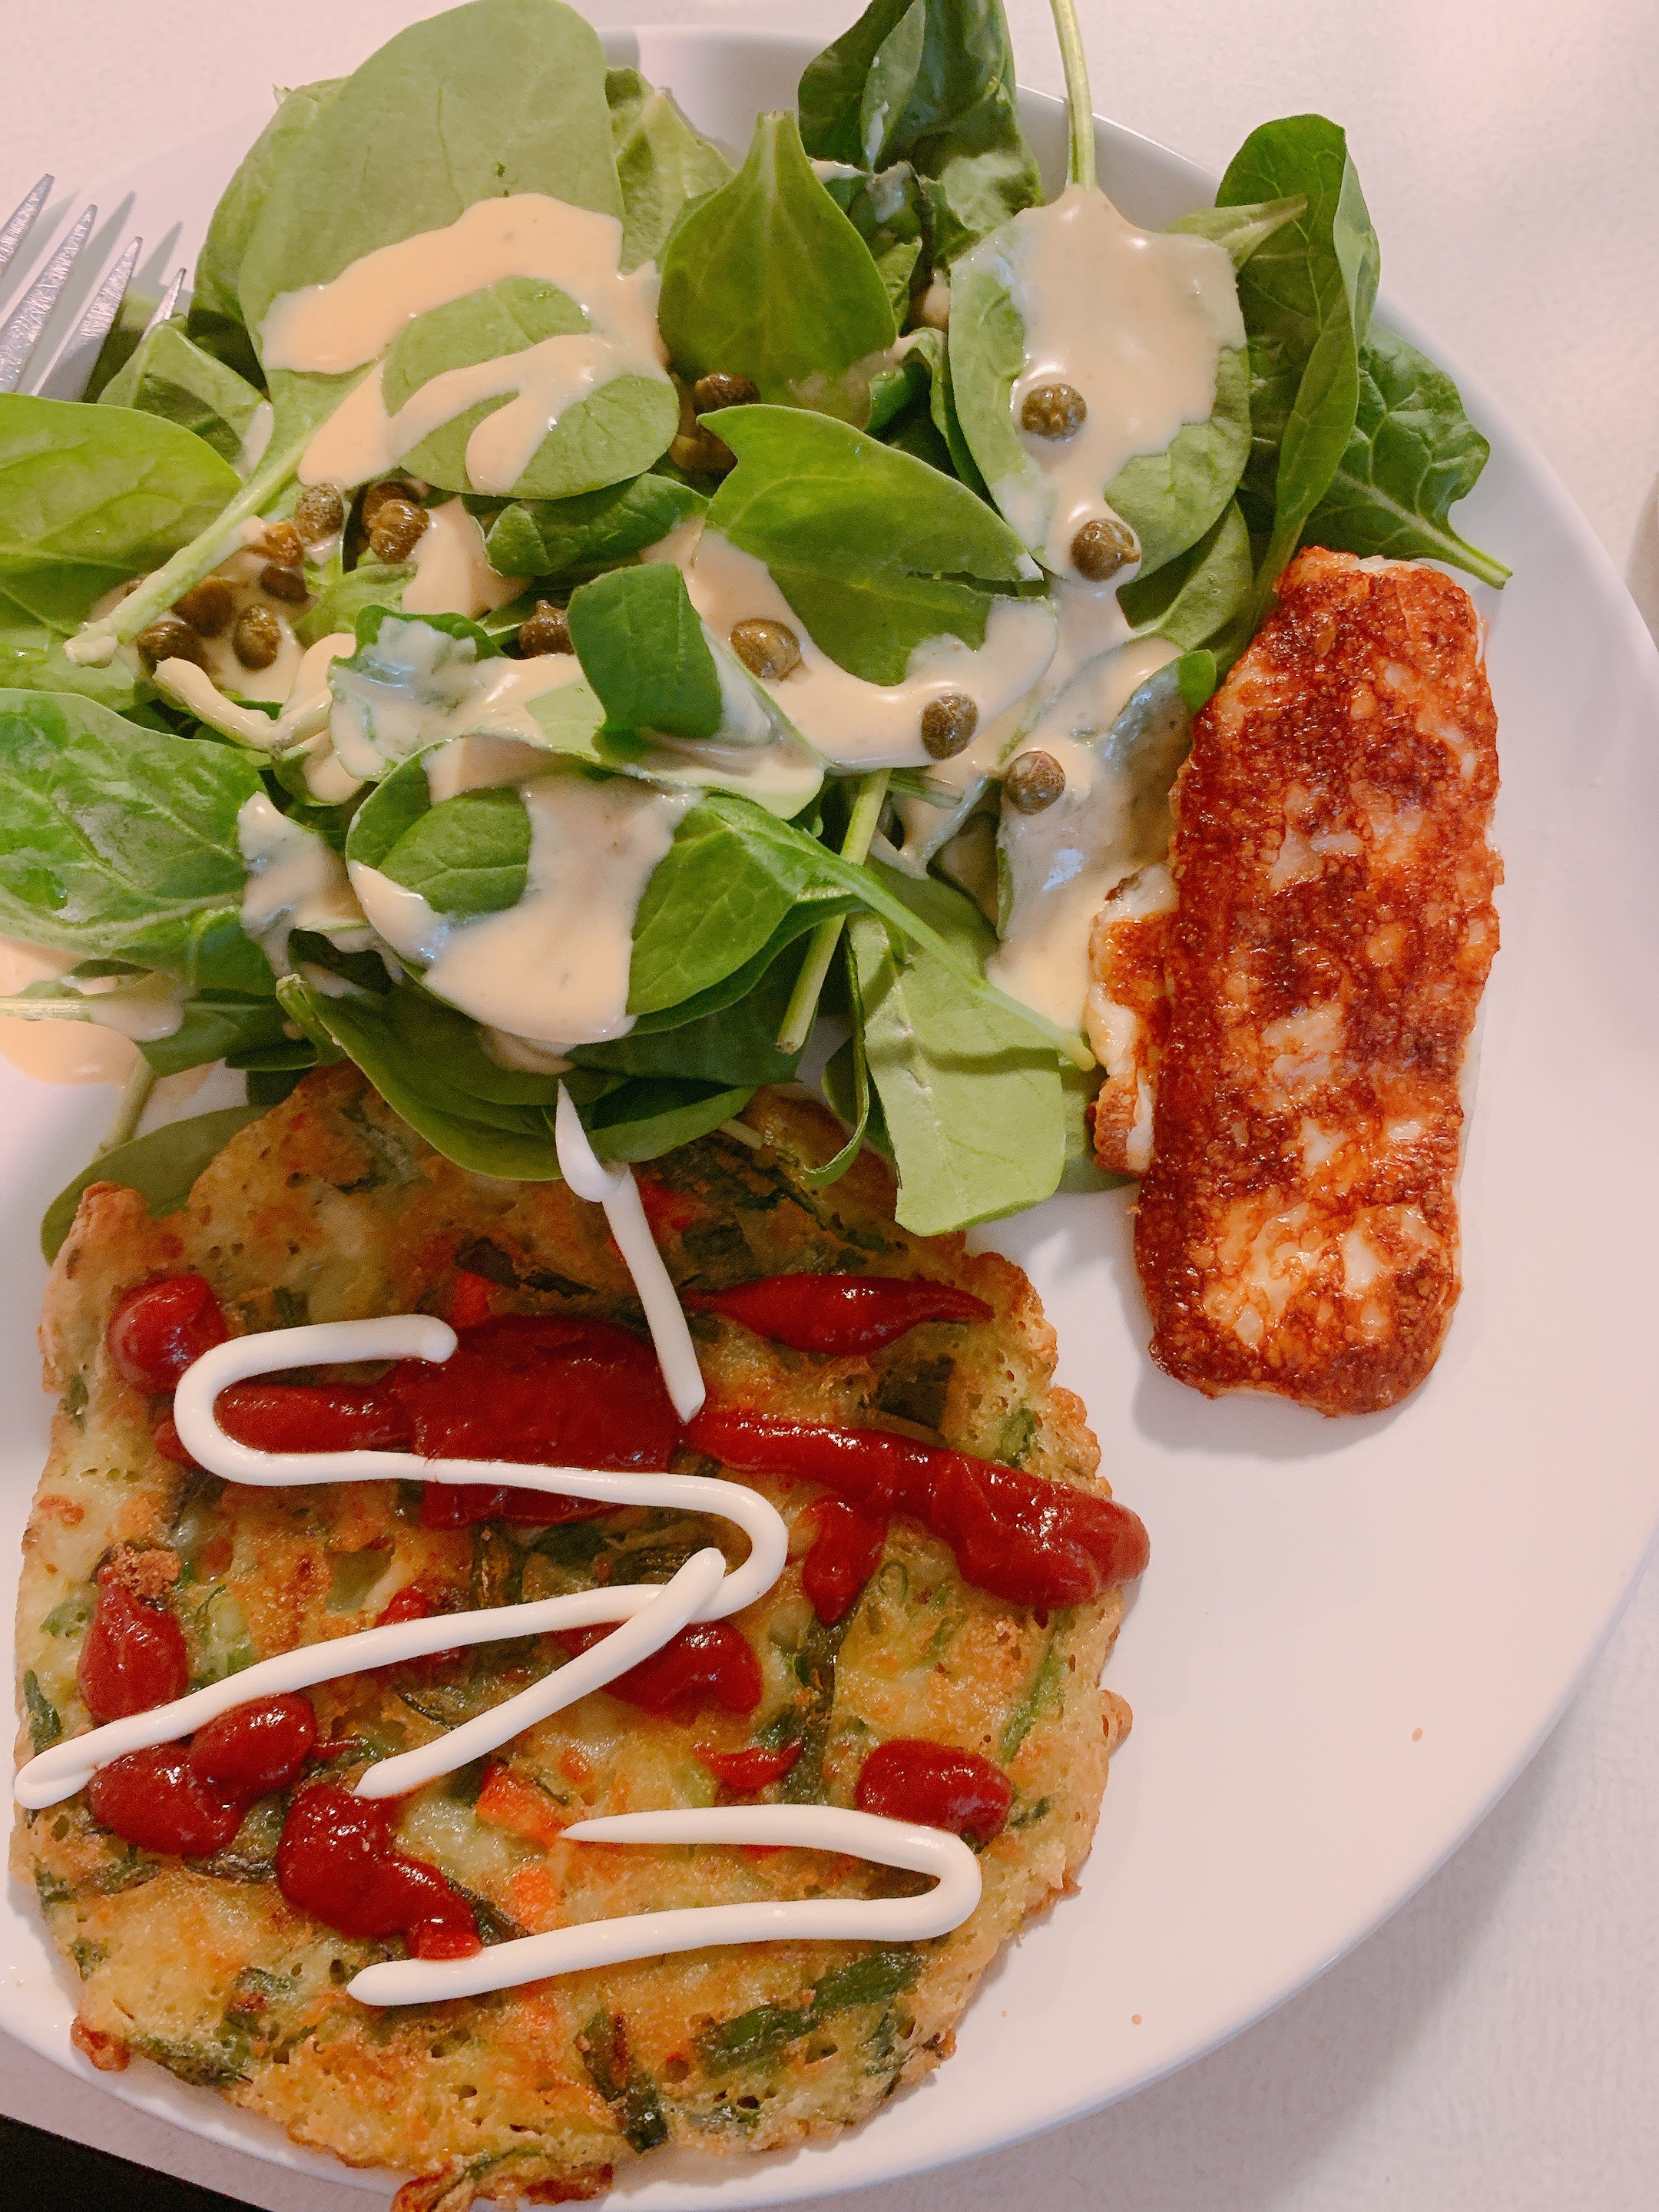 tj's scallion pancakes with grilled halloumi and spinach salad.